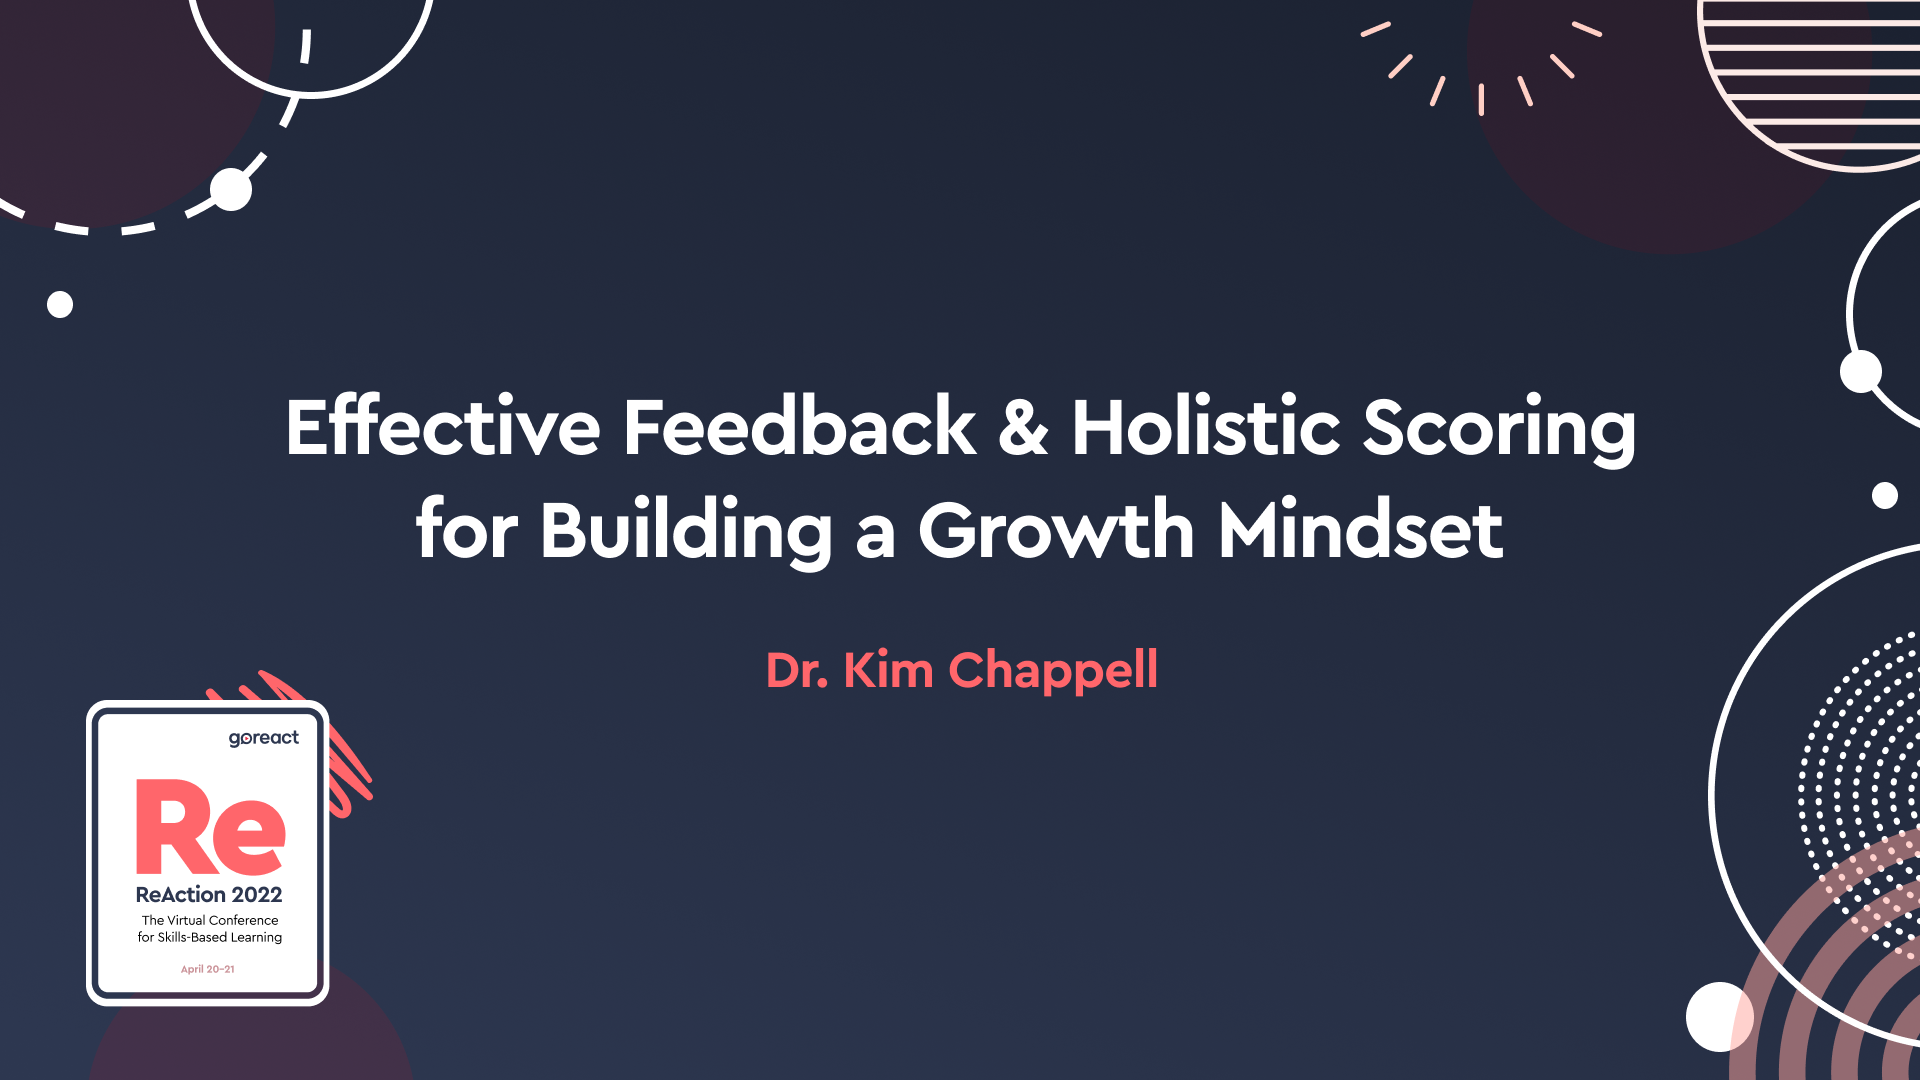 Effective Feedback and Holistic Scoring for Building a Growth Mindset & Roundtable Session